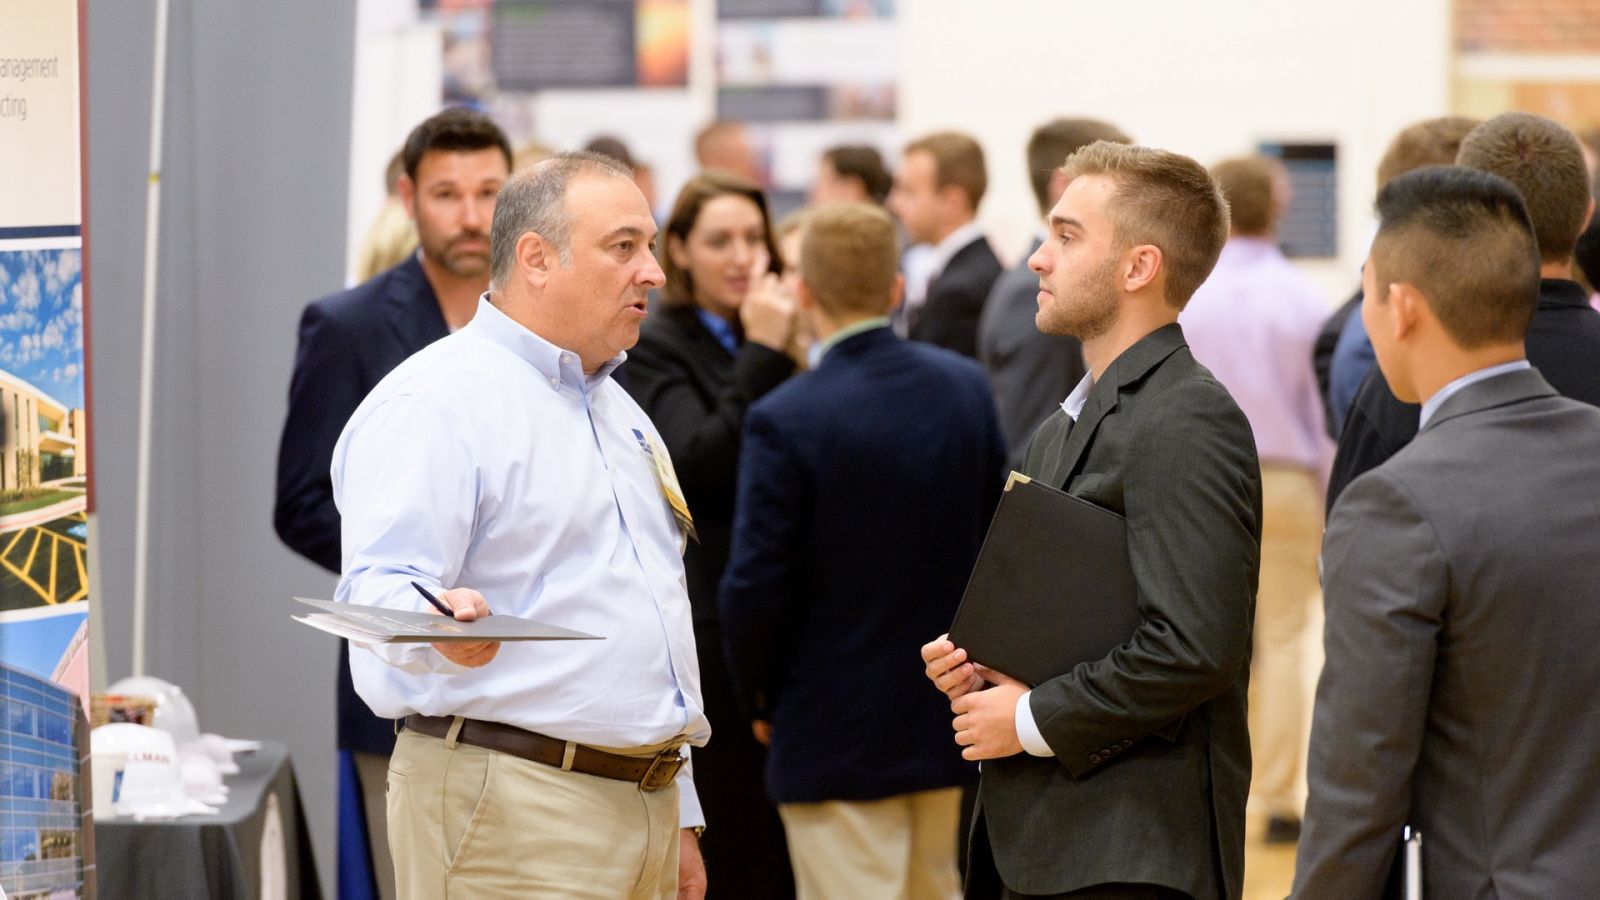 Nearly 800 students met representatives from 184 companies.